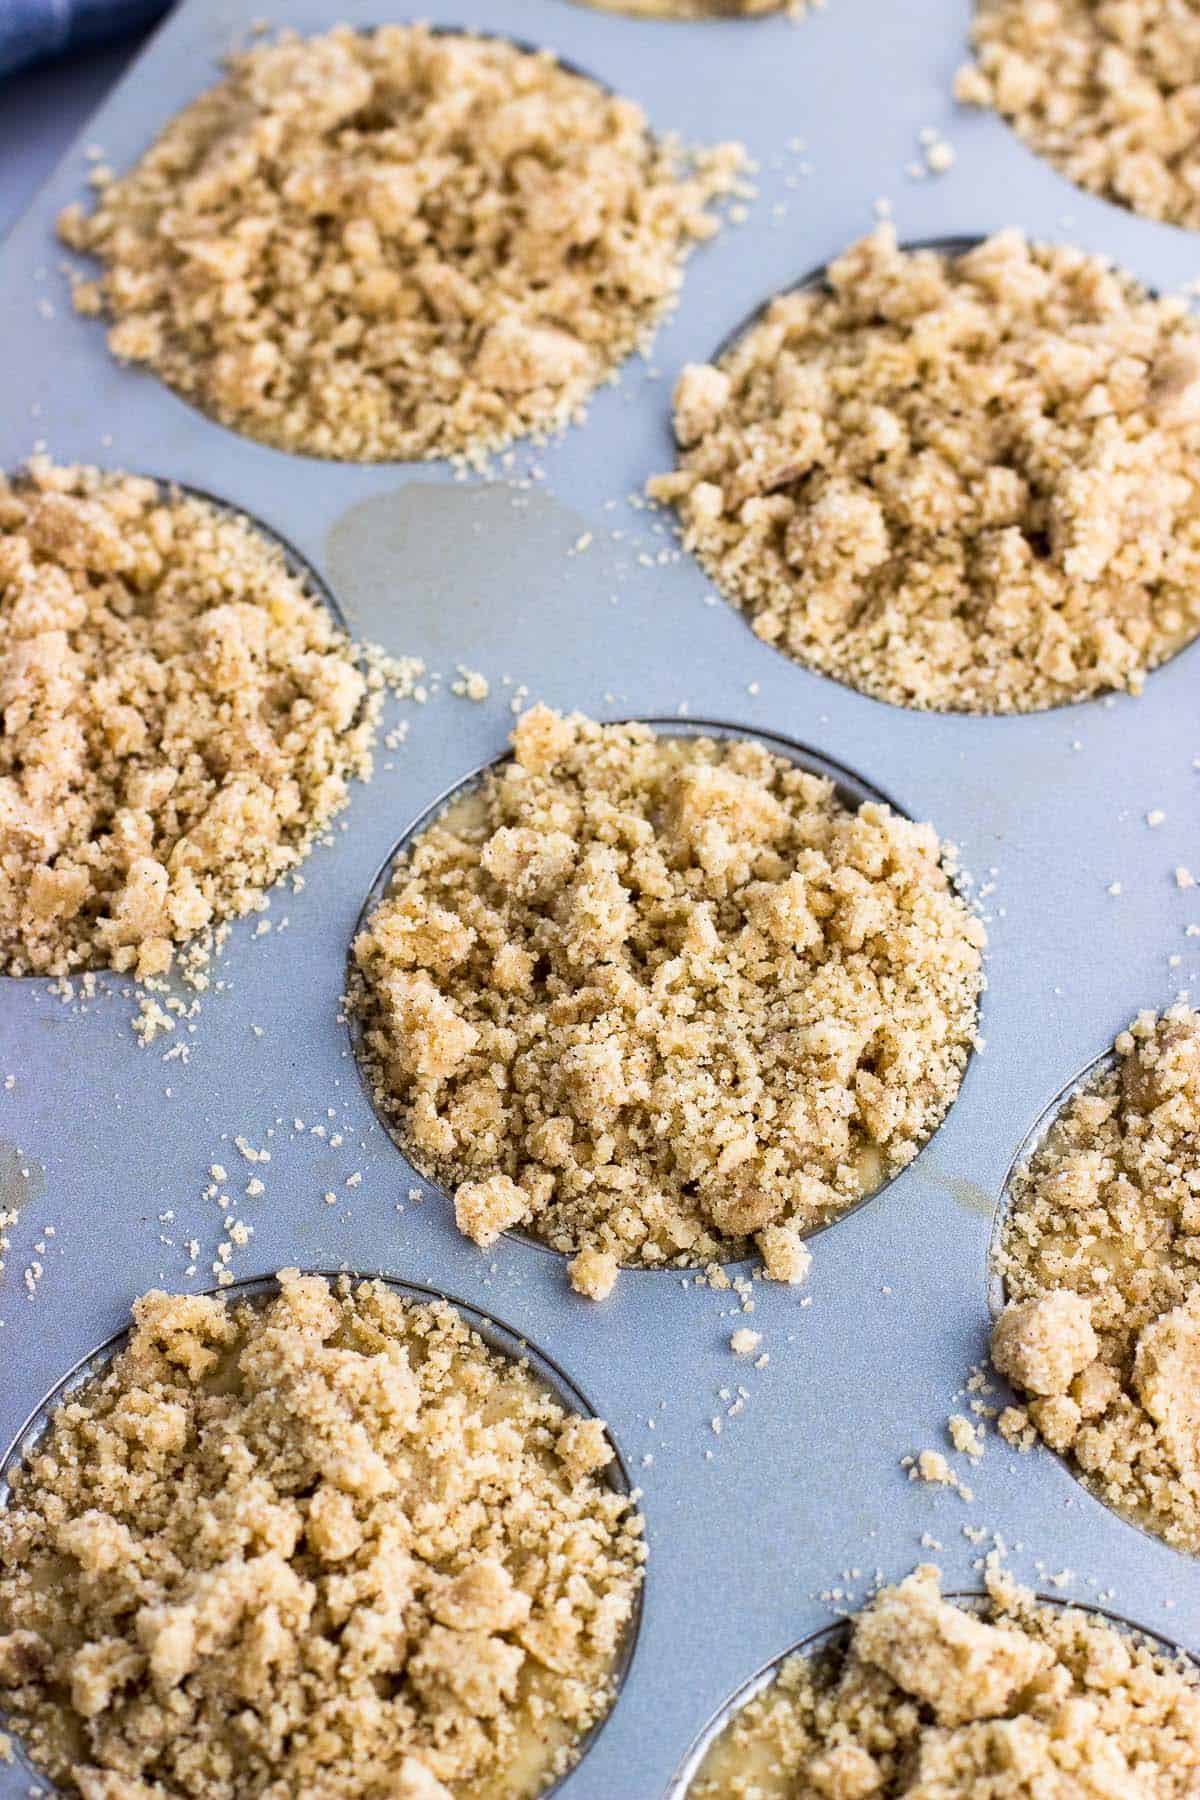 Batter poured into a muffin tin with crumb topping.